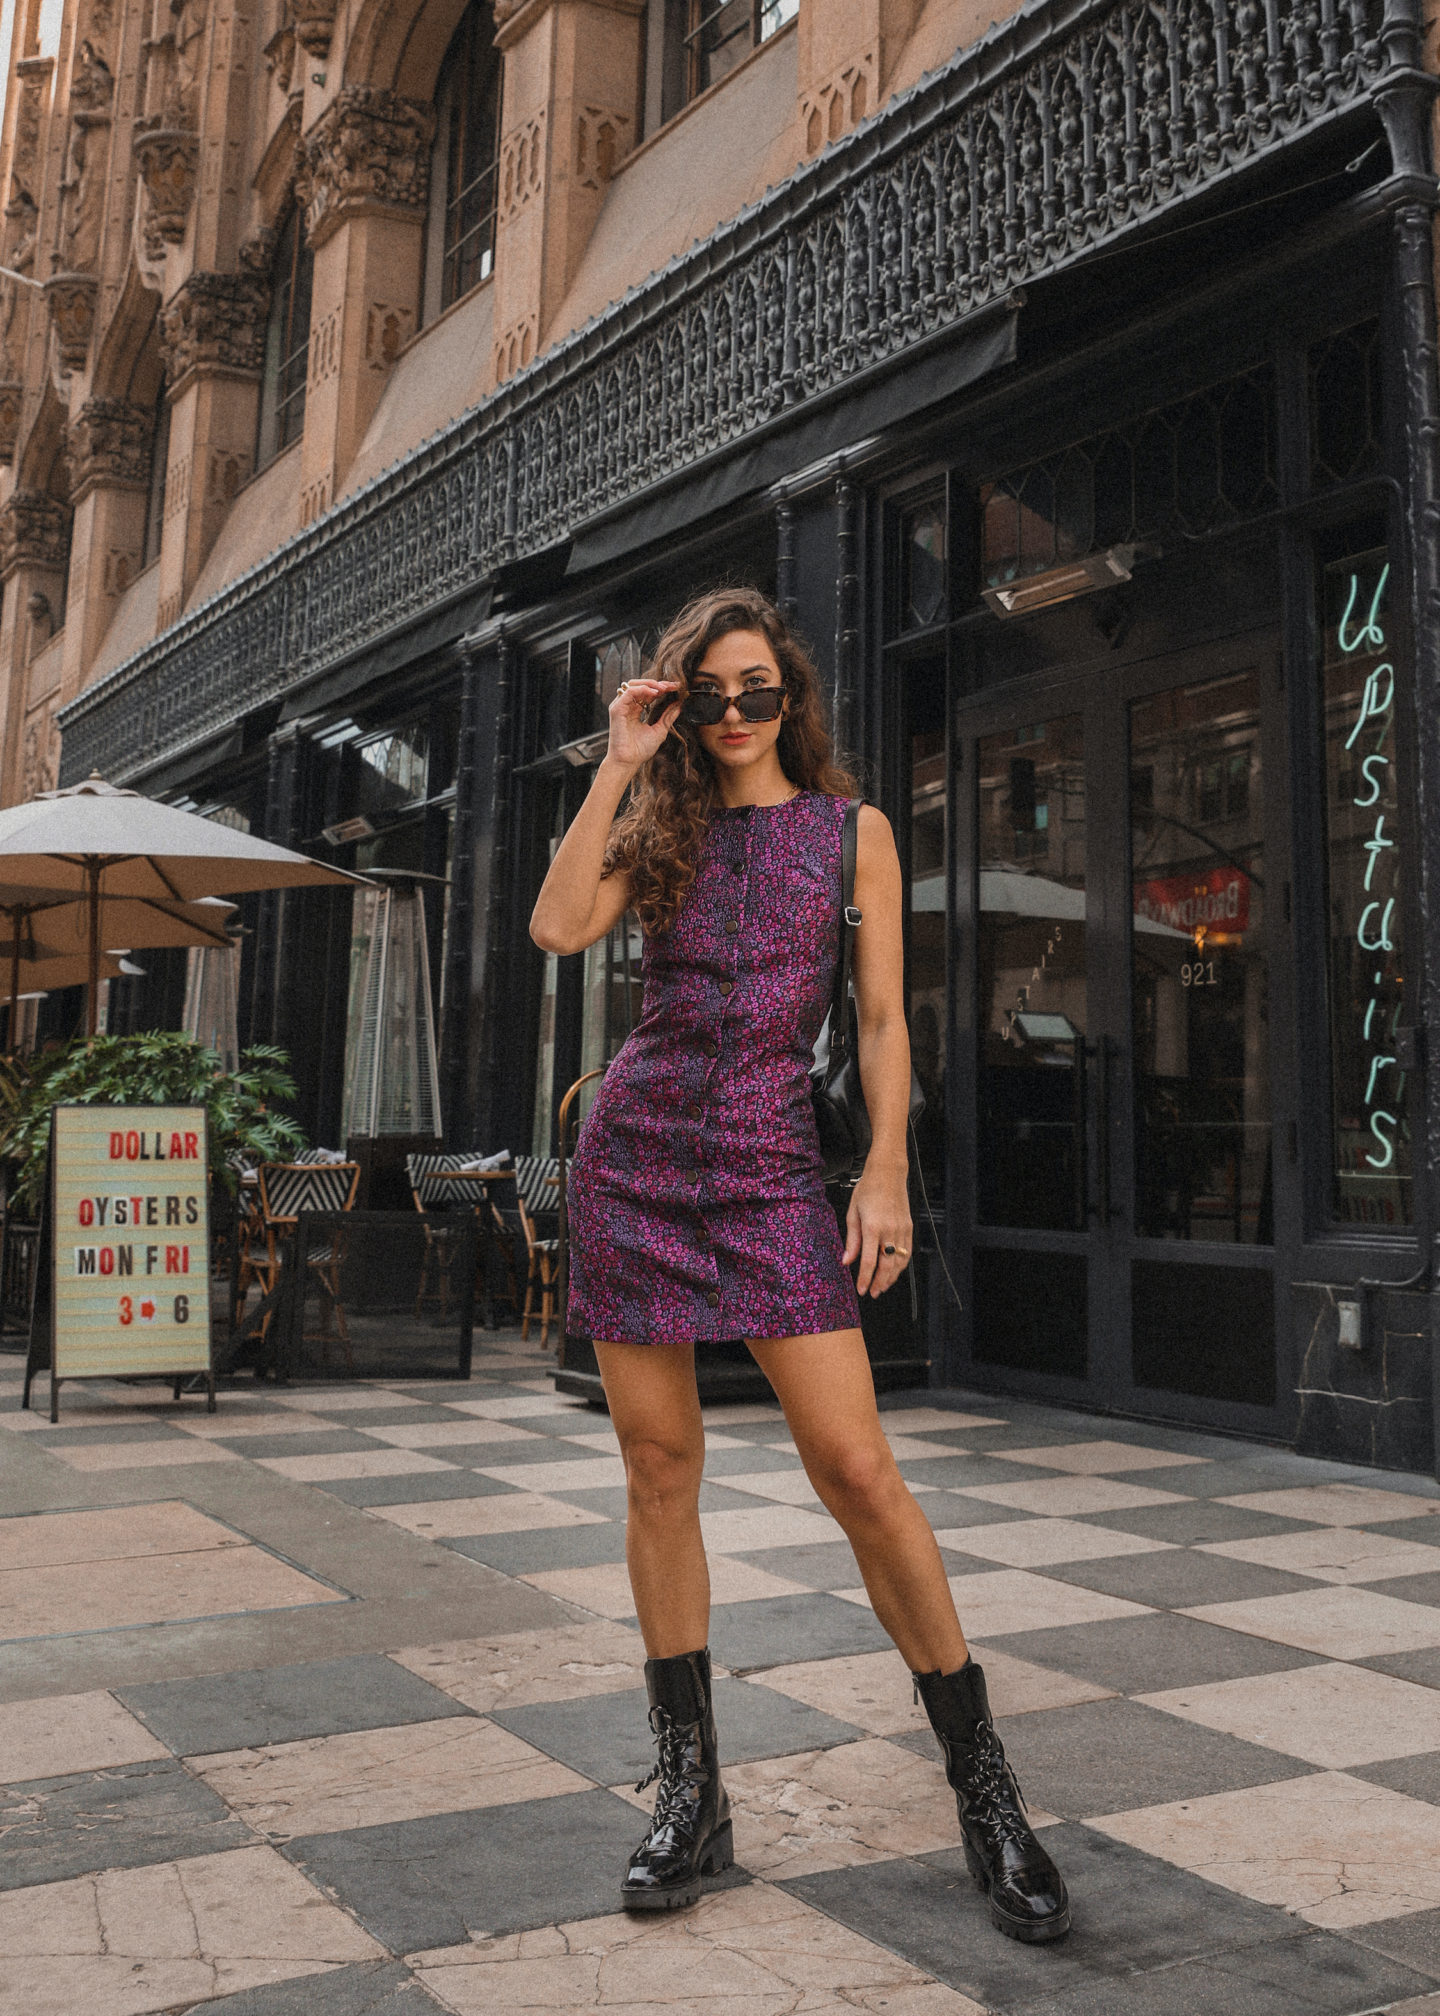 LA Outfit Recap - womens fashion DTLA california lug boots retro curly hair mini dress outfit inspo blogger NYC long hair styles street style